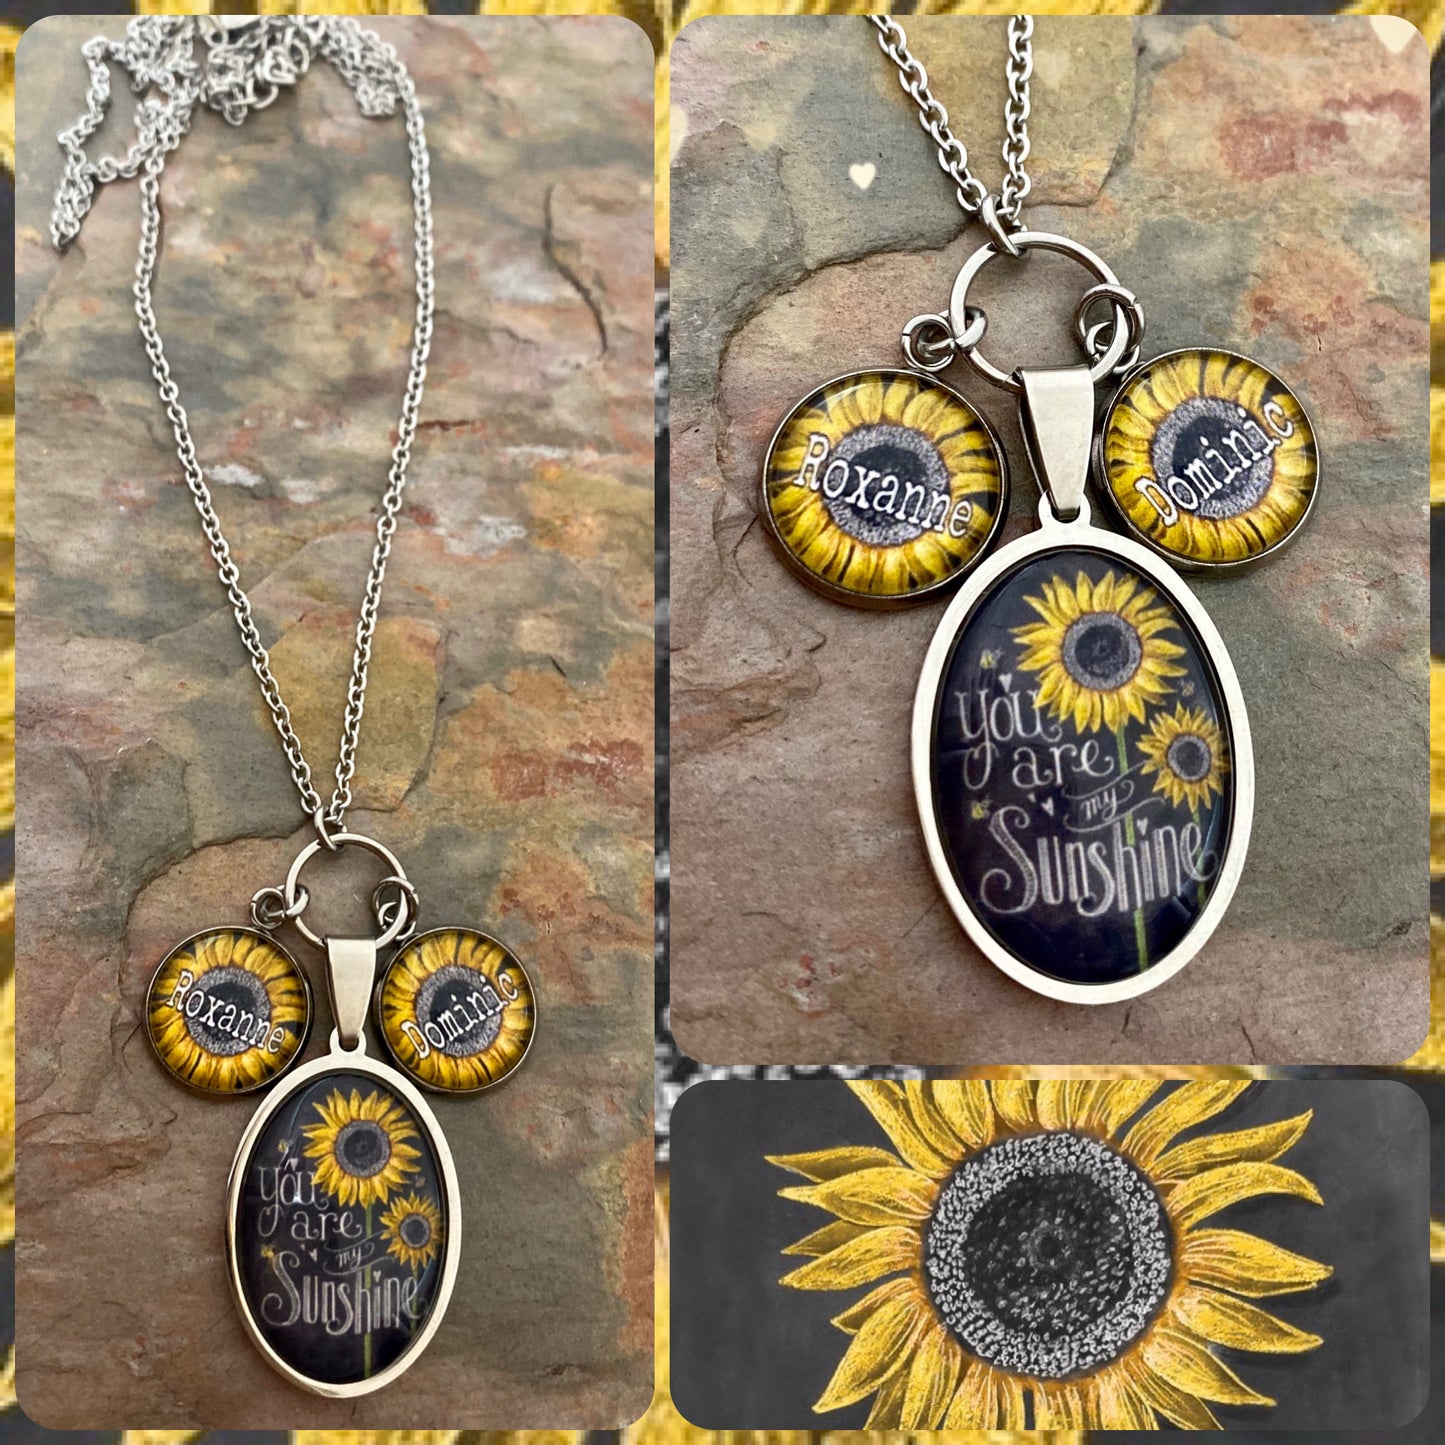 You are My Sunshine Necklace- Oval (includes one name)